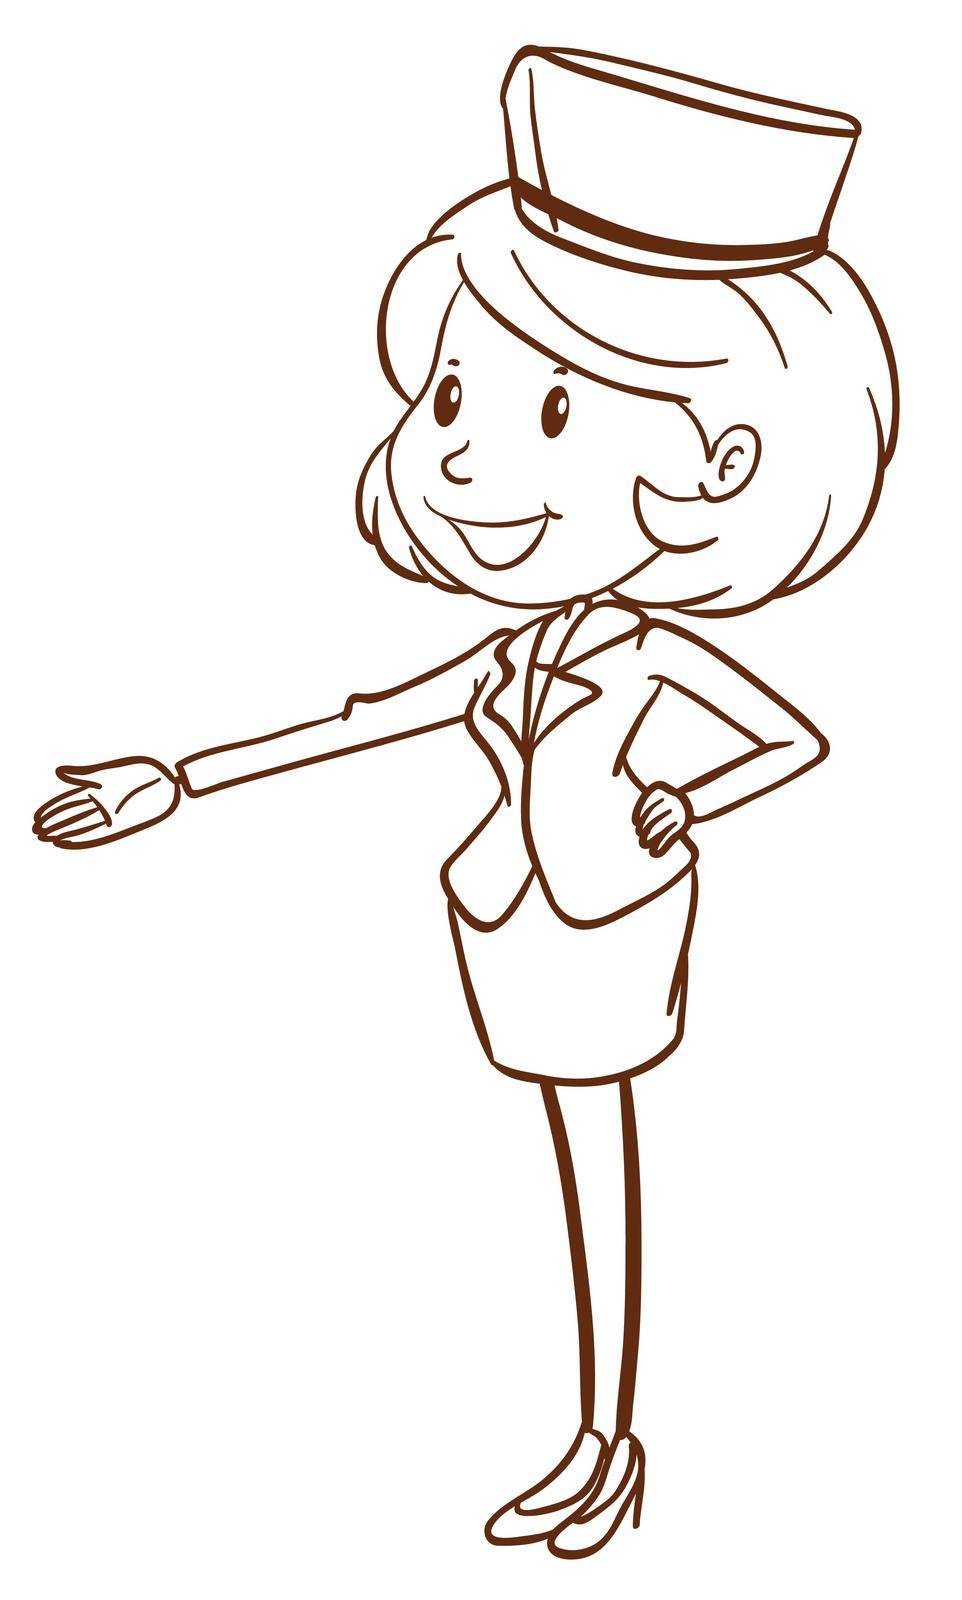 Illustration of a simple air hostess on a white background